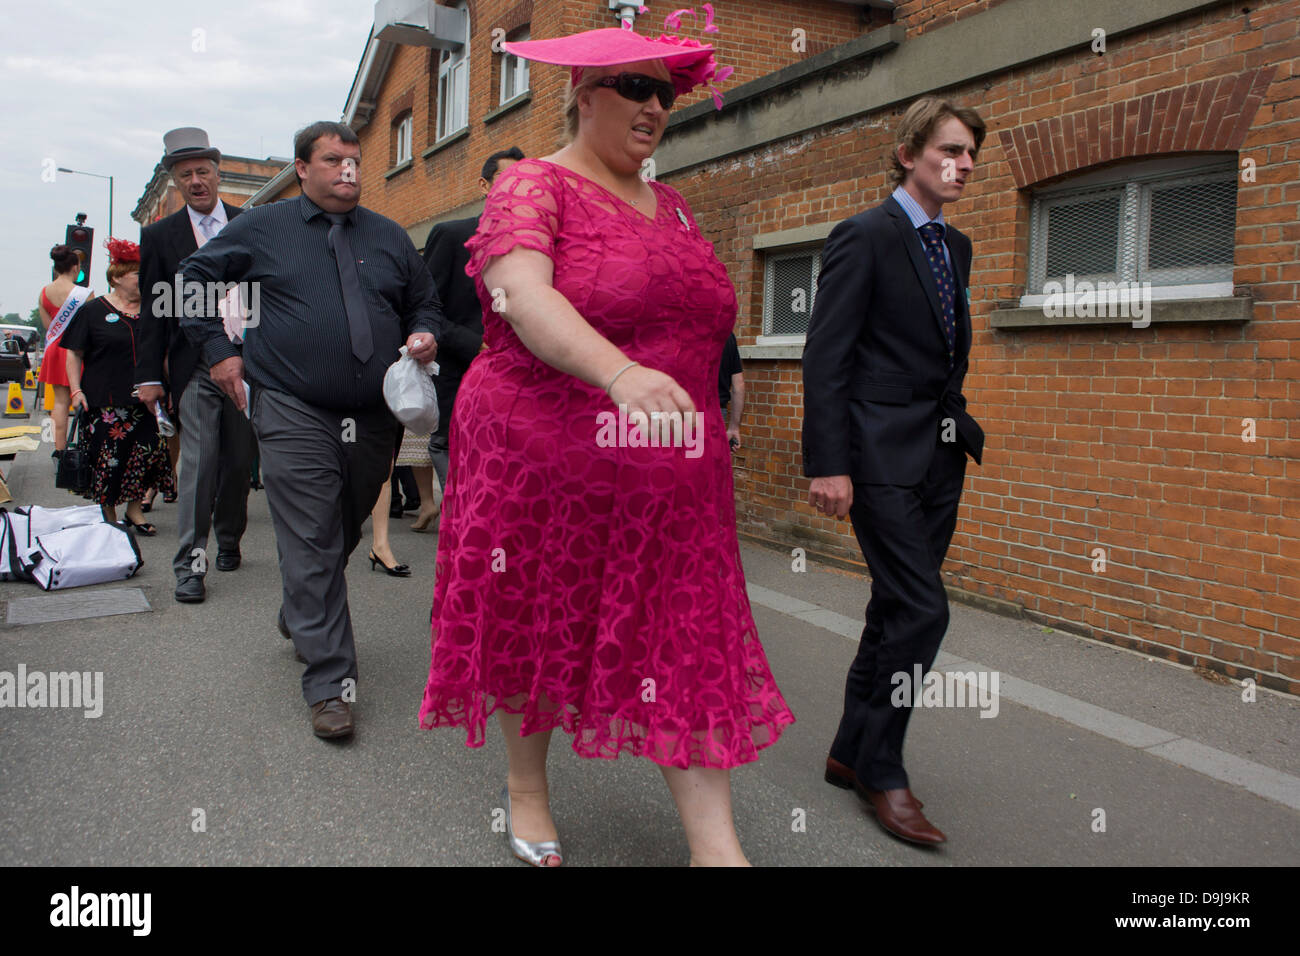 Large lady in pink arrives with family or friends during the annual Royal Ascot horseracing festival in Berkshire, England. Royal Ascot is one of Europe's most famous race meetings, and dates back to 1711. Queen Elizabeth and various members of the British Royal Family attend. Held every June, it's one of the main dates on the English sporting calendar and summer social season. Over 300,000 people make the annual visit to Berkshire during Royal Ascot week, making this Europe’s best-attended race meeting with over £3m prize money to be won. Stock Photo